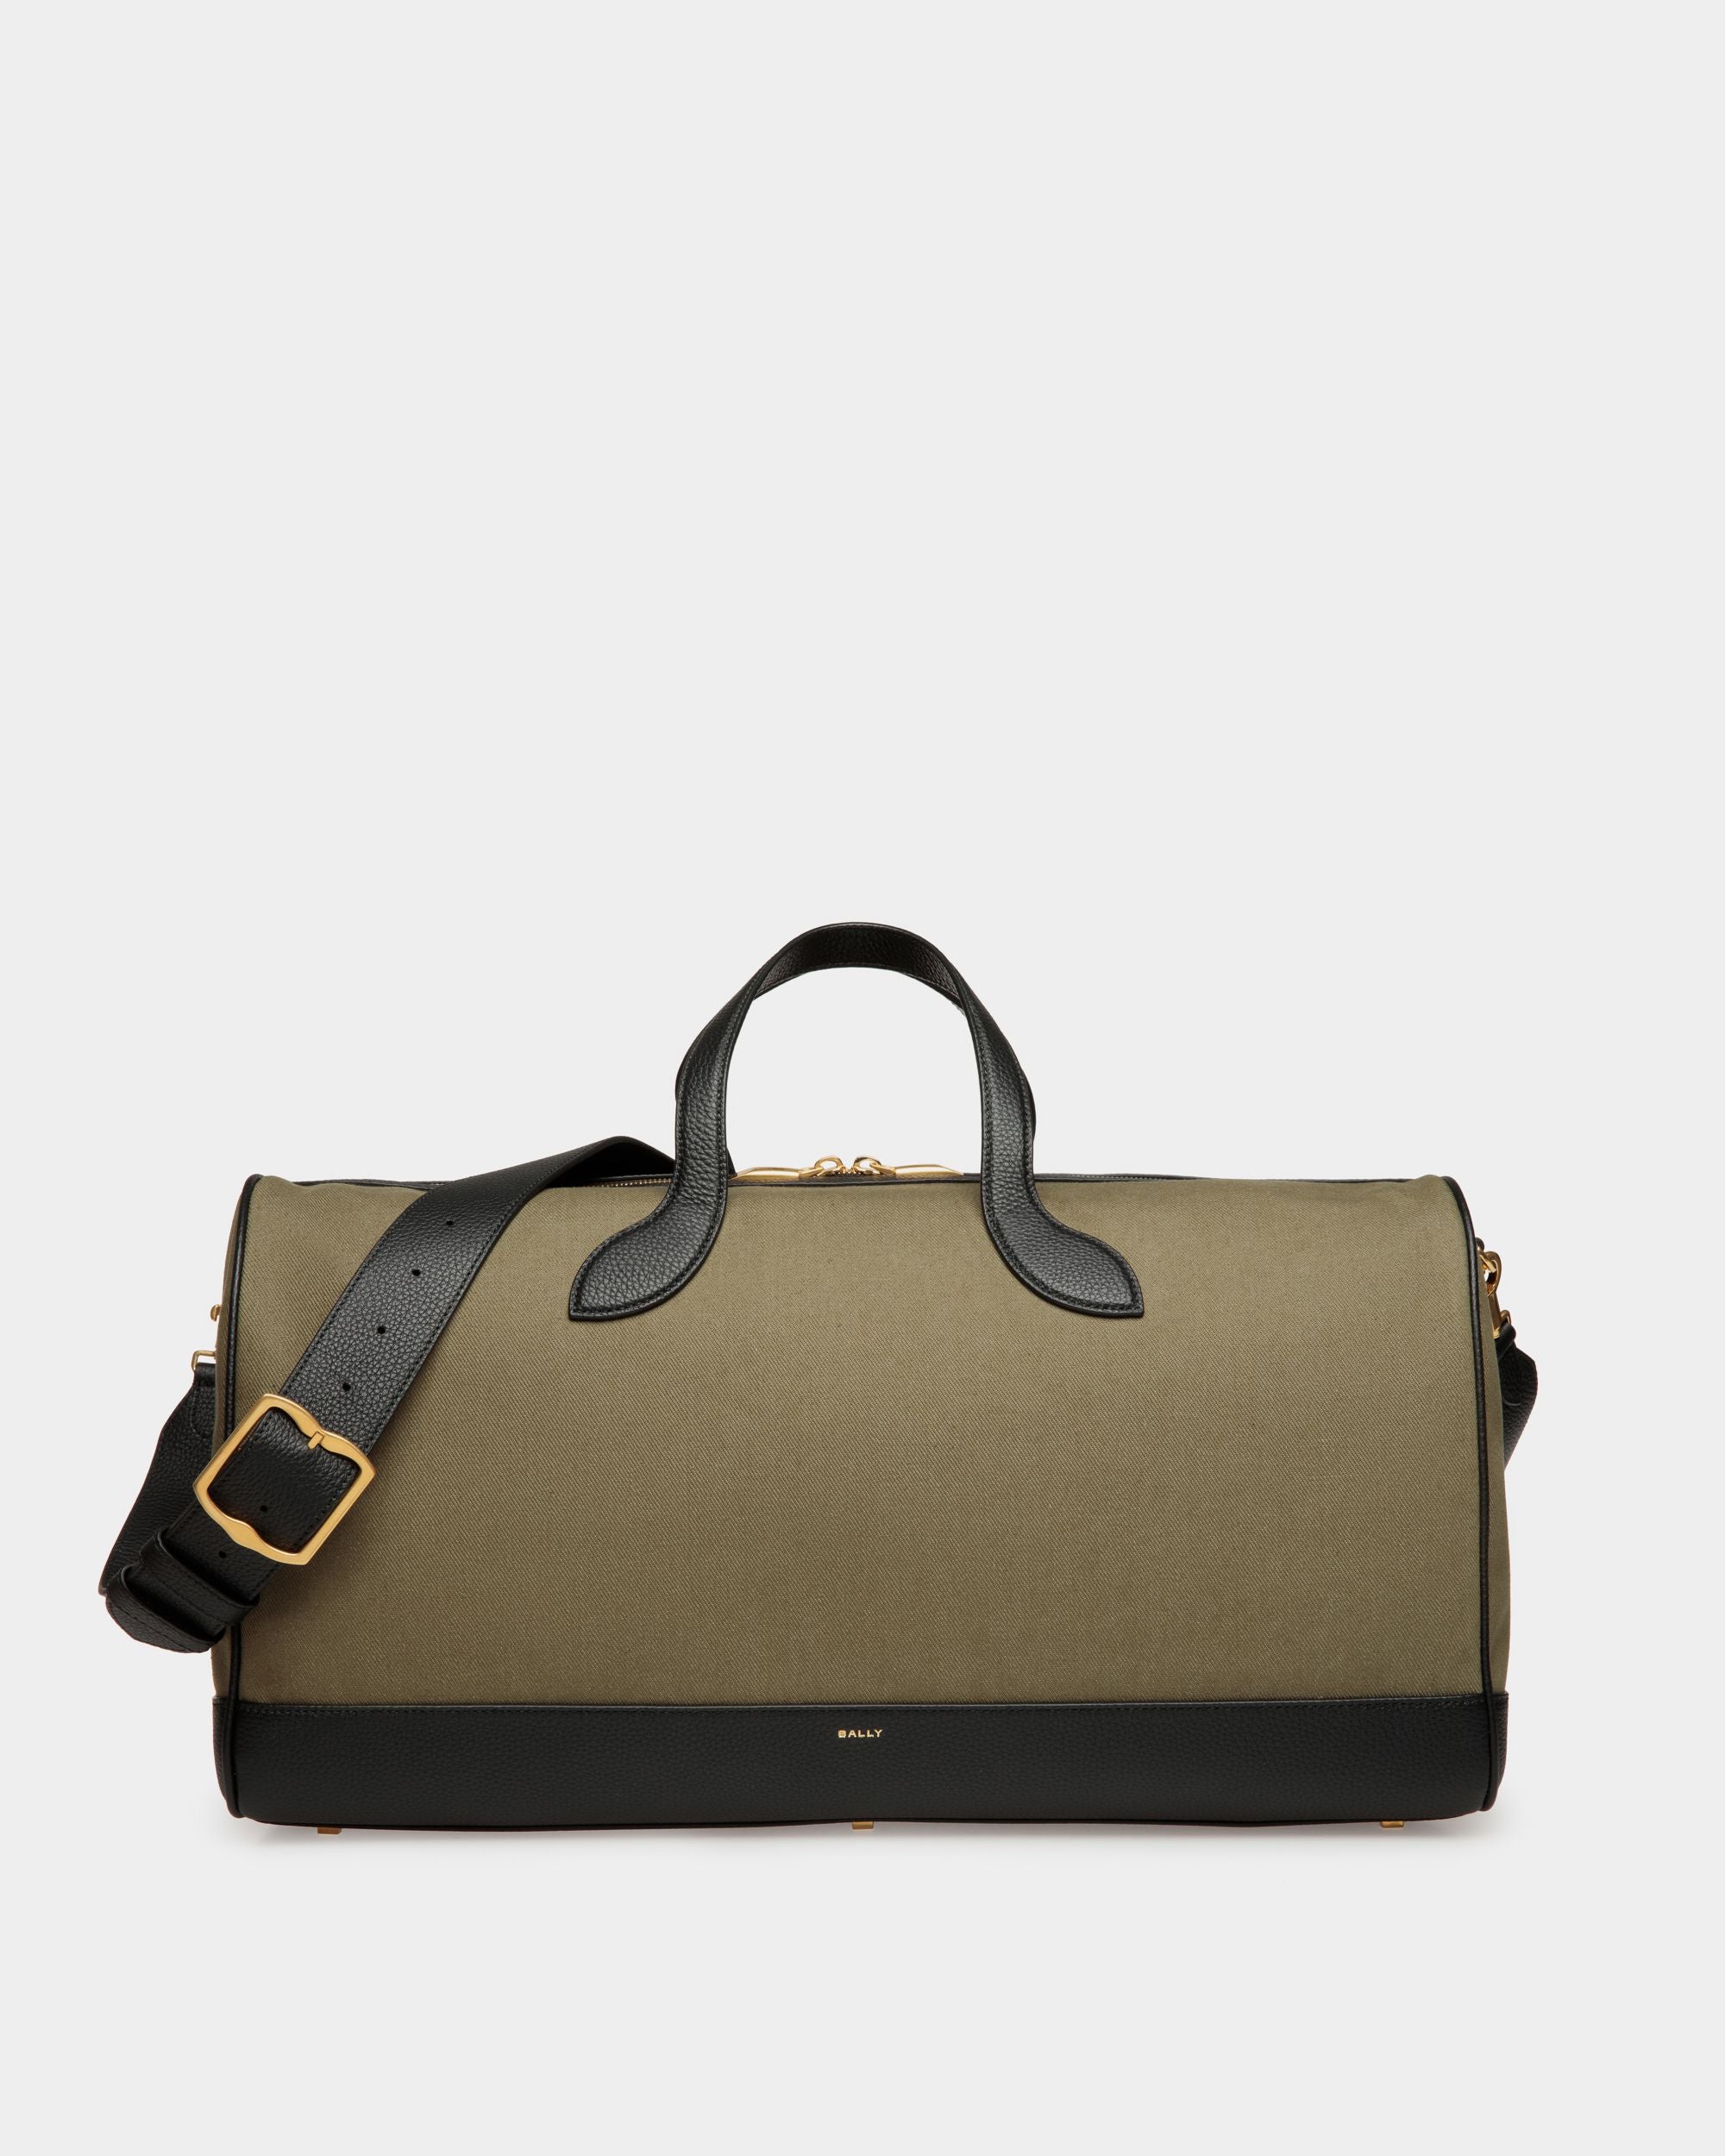 Bar | Men's Weekender in Green Canvas And Black Leather | Bally | Still Life Front